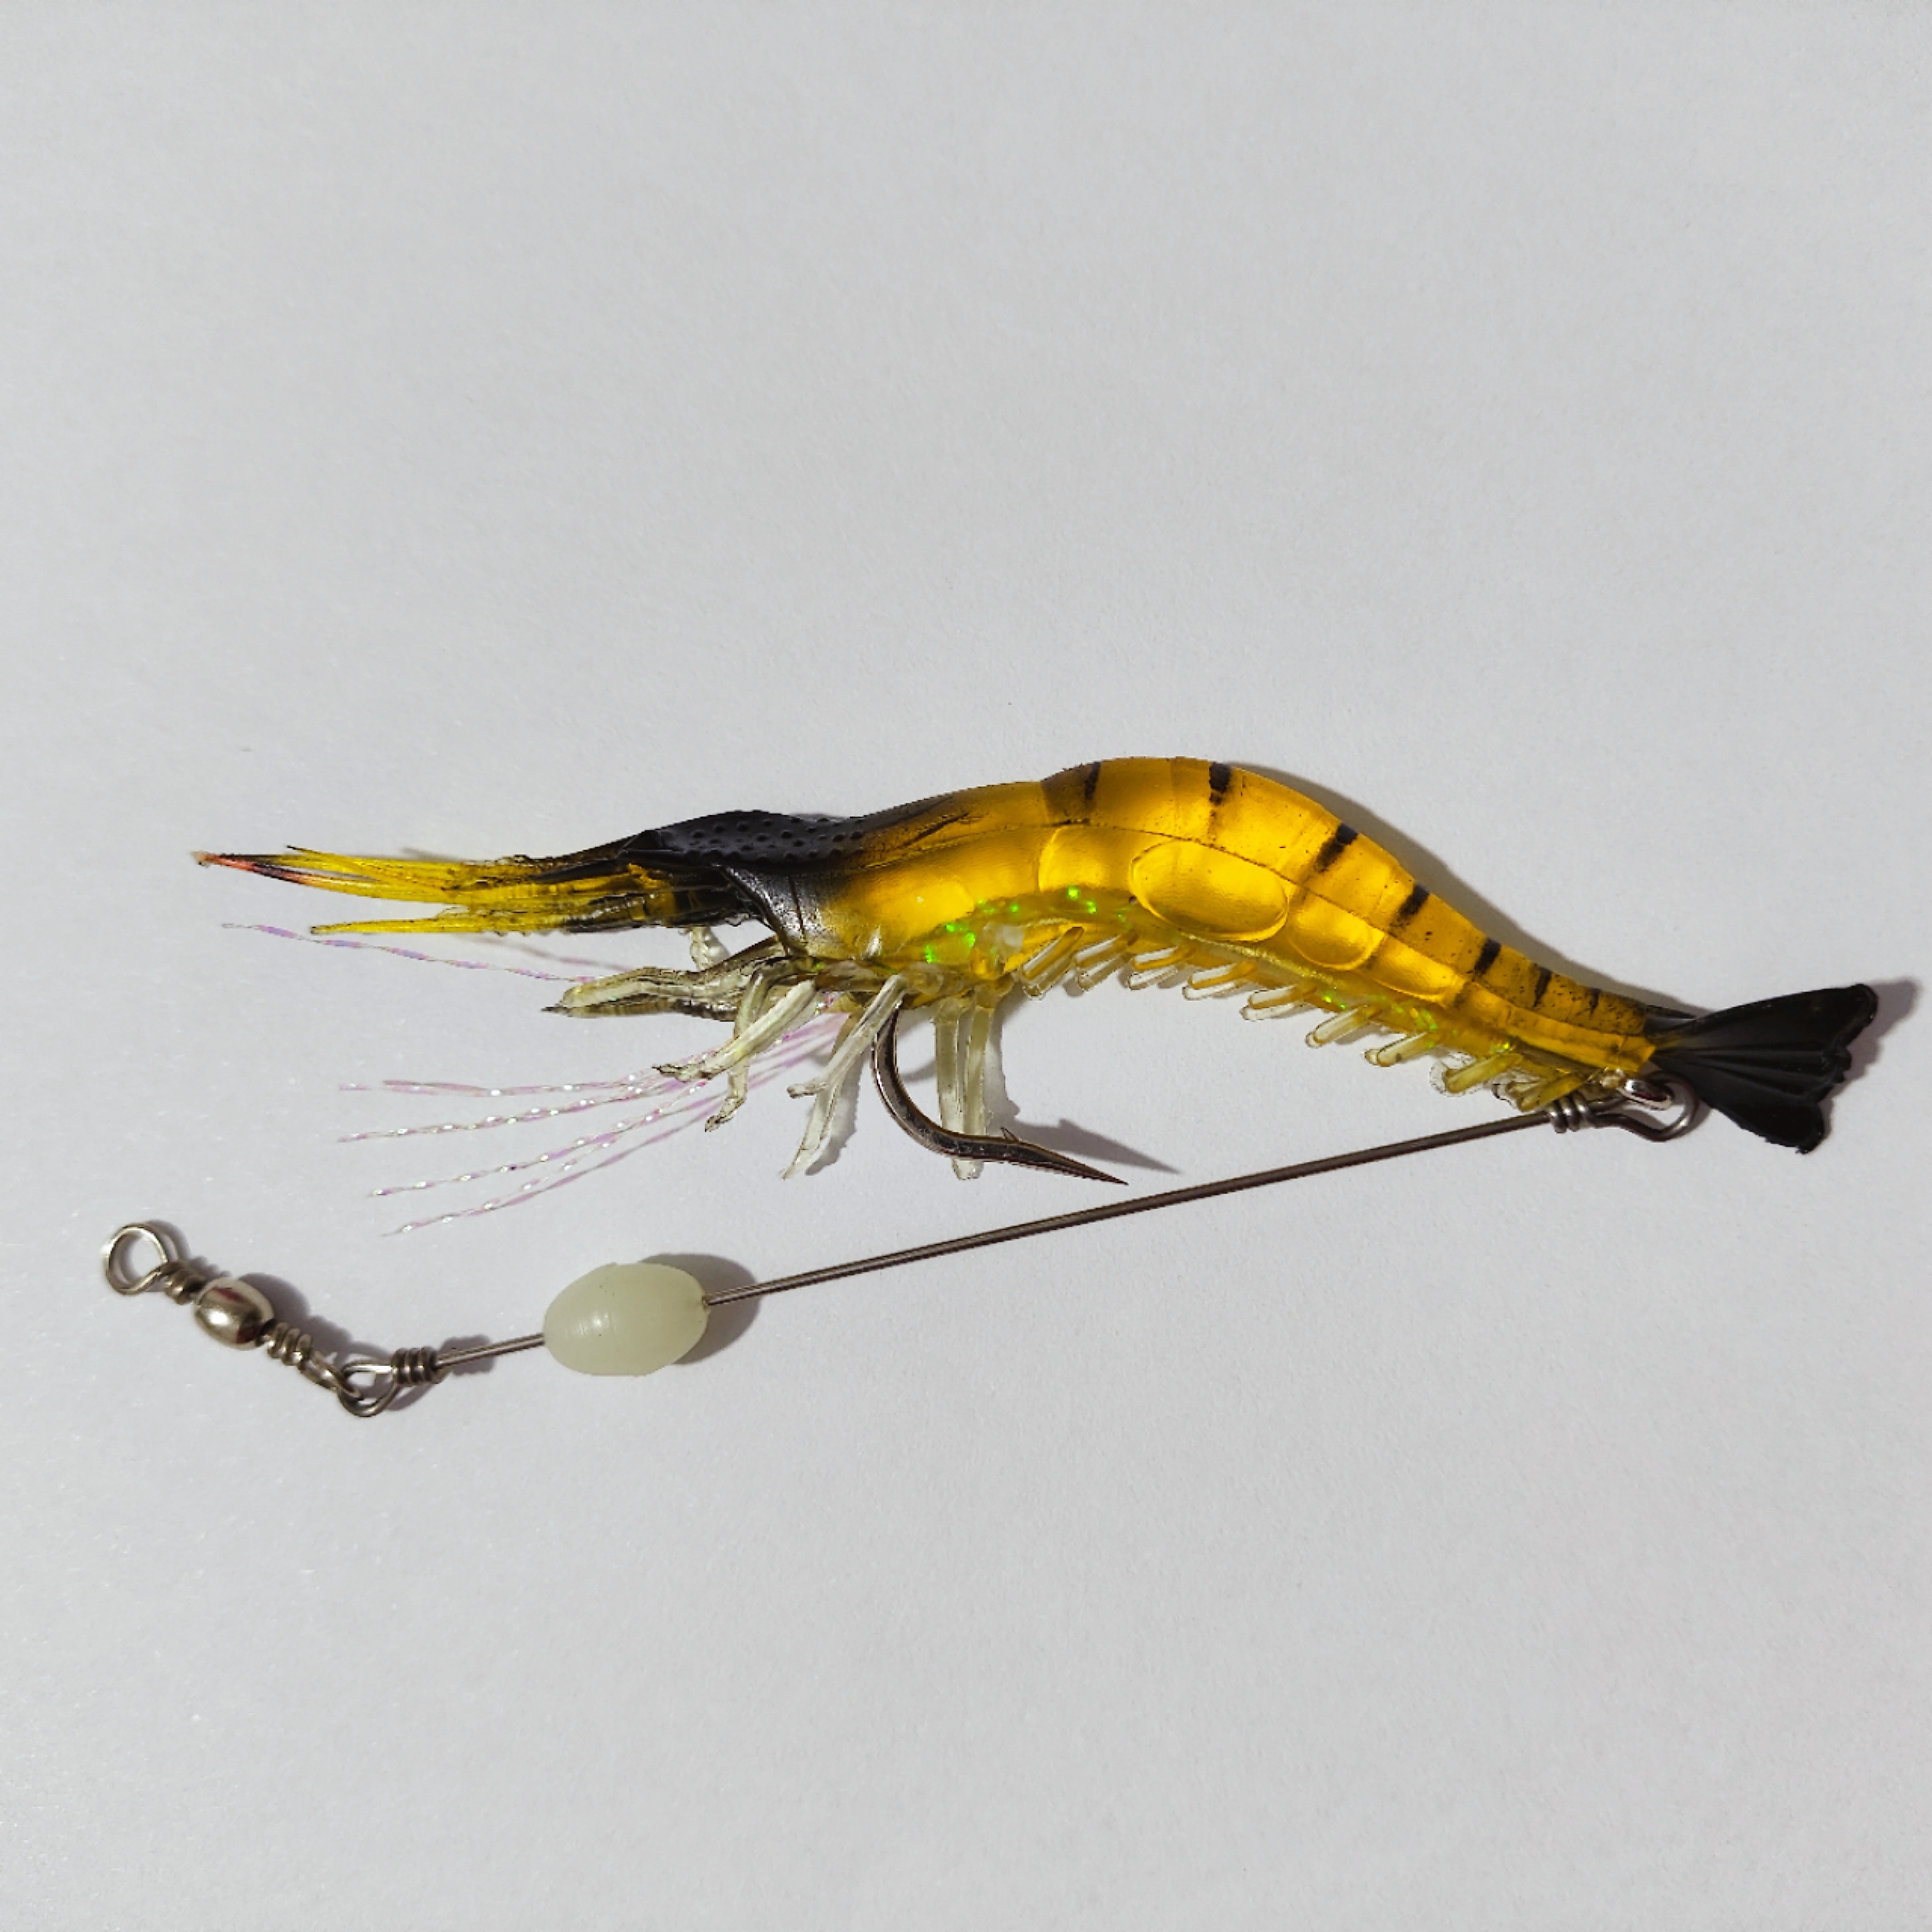 6cm 3g Shrimp Soft Baits & Soft Bionic Fishing Lure With Mixed Hooks  Artificial Bait Fishing Tackle B7 43189p From Hgfj875, $18.52